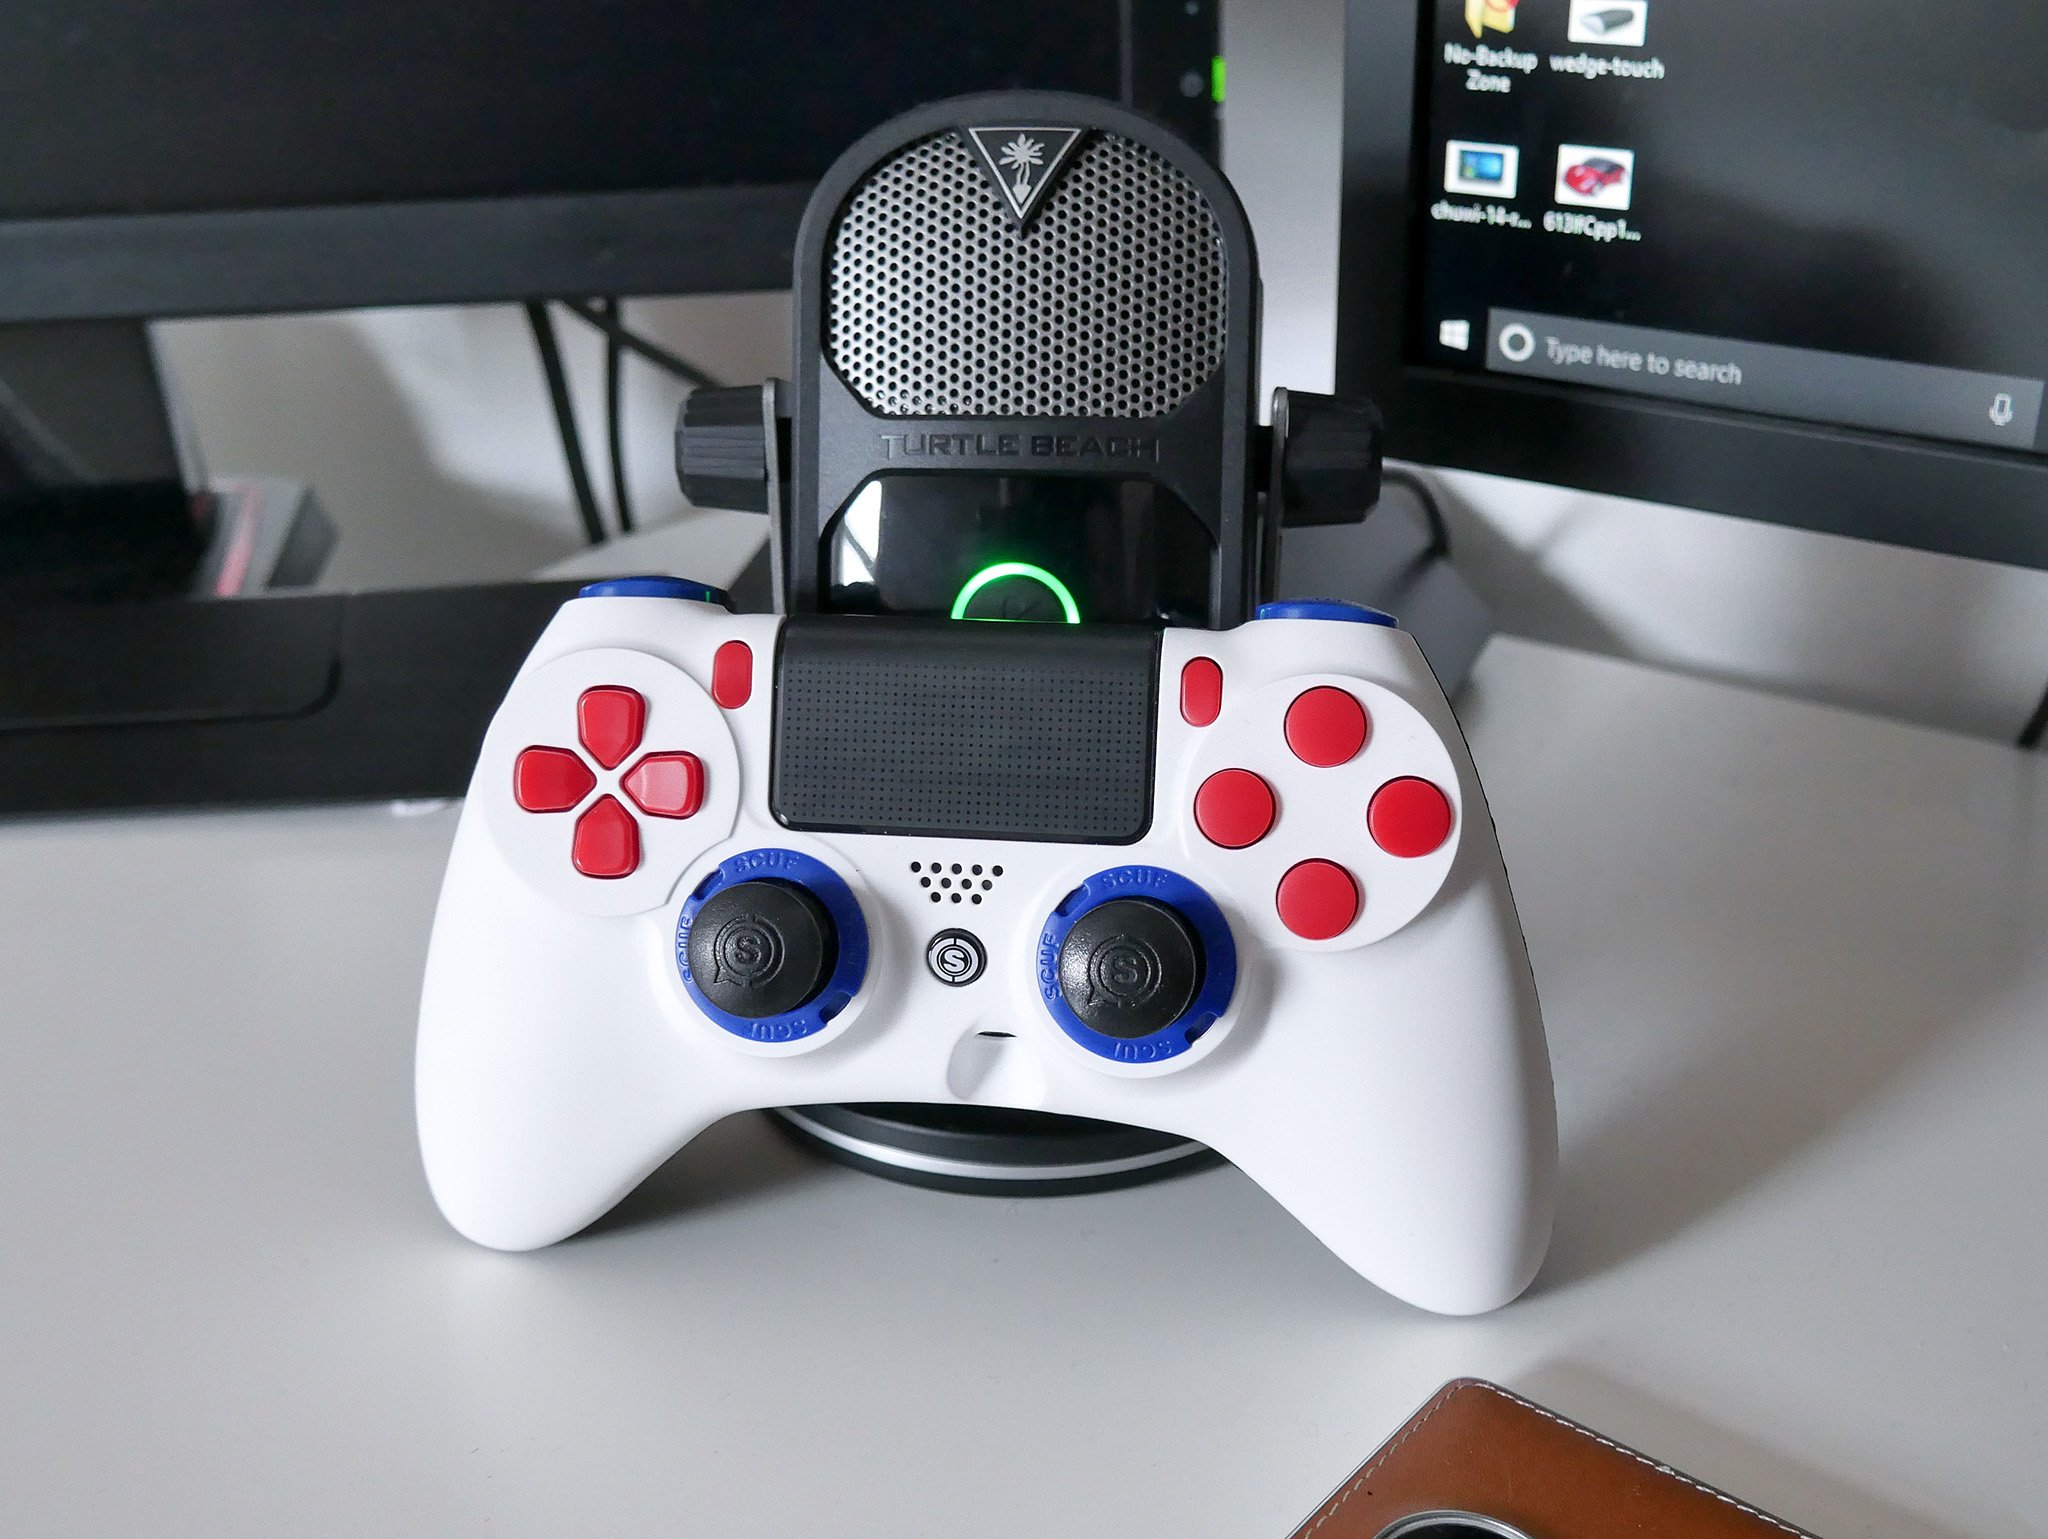 scuf controller review xbox one